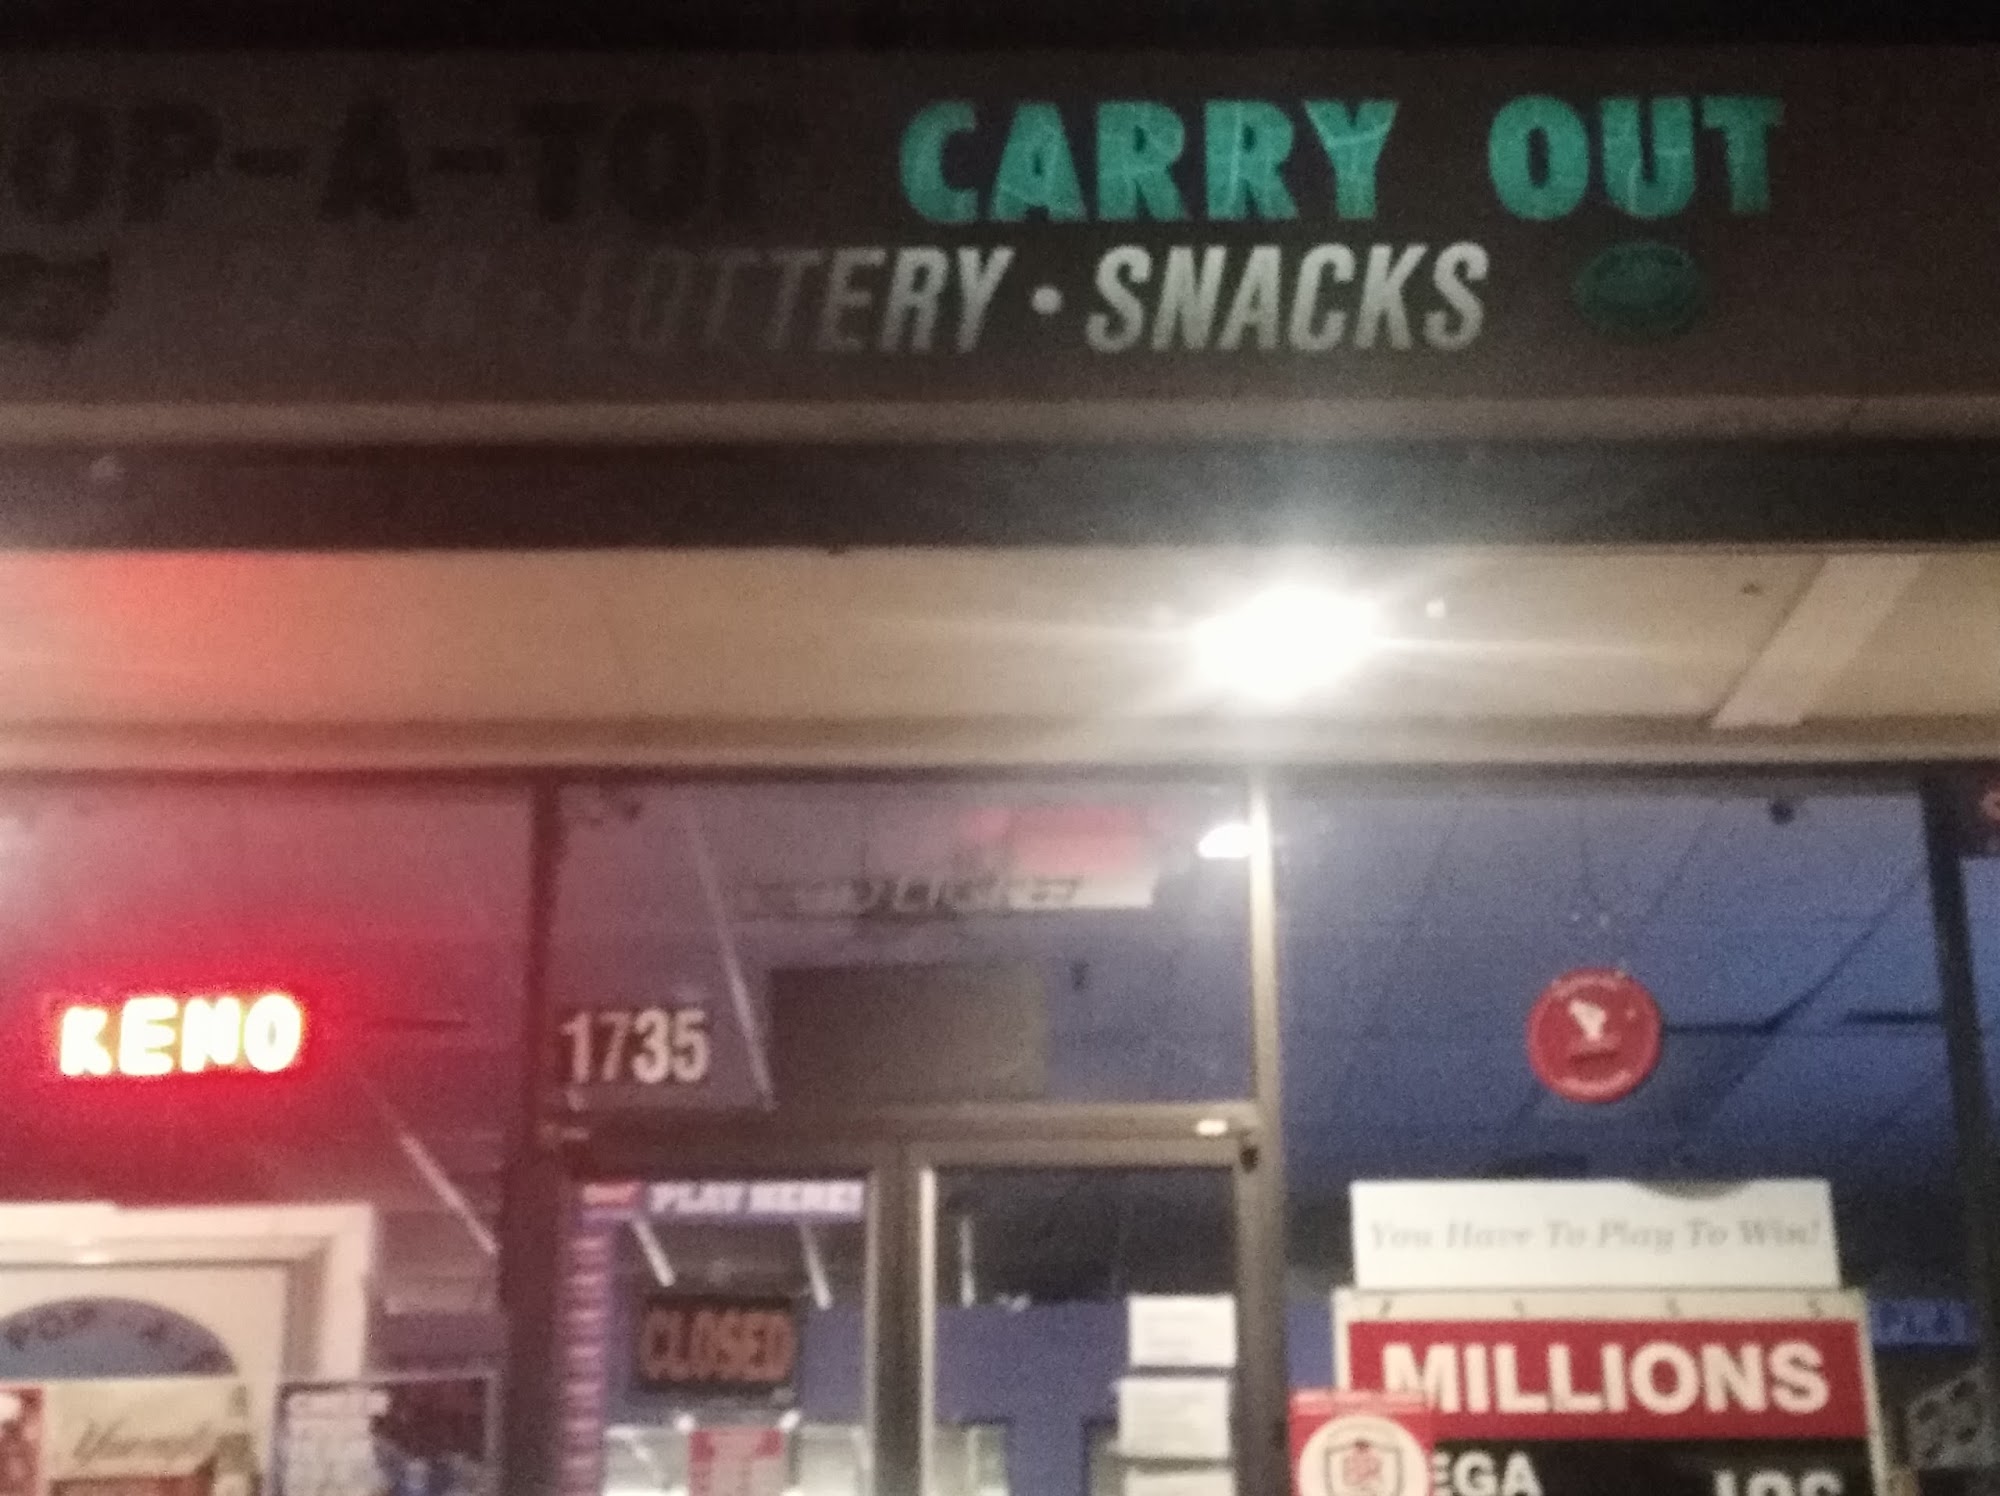 Pop-A-Top Carry Out